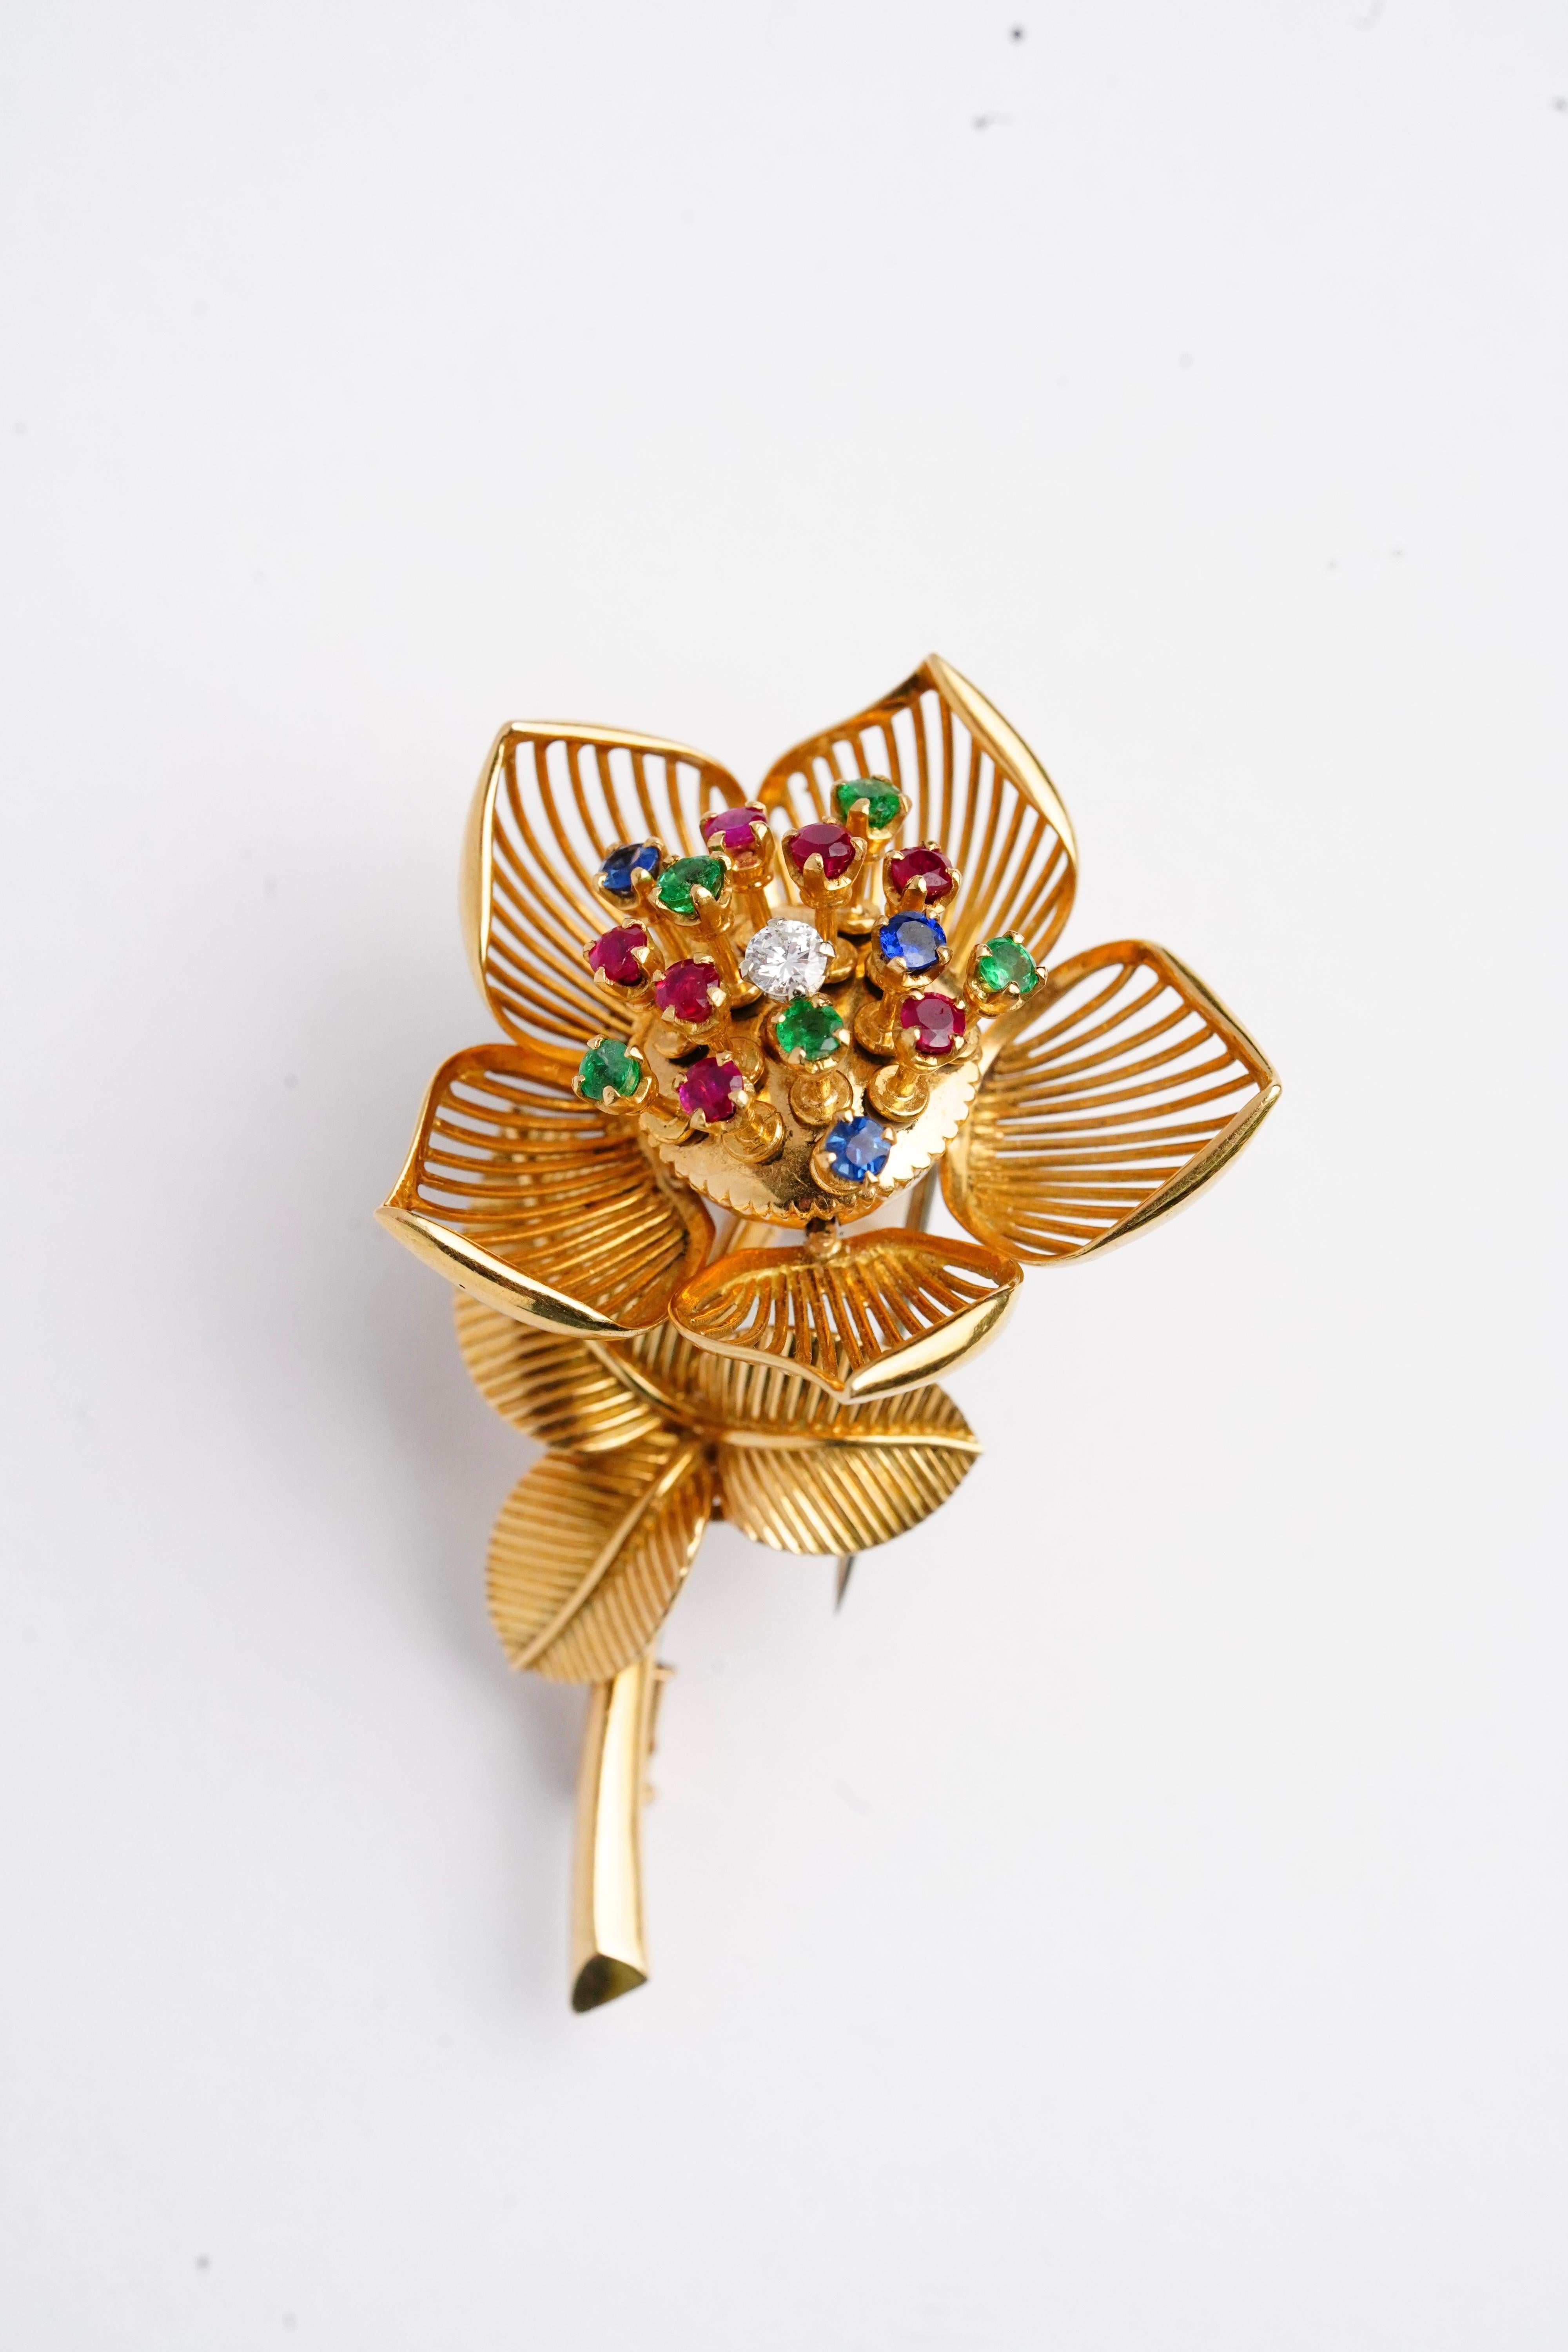 An exquisite brooch made by esteemed French jeweller Mellerio, a high-end jewellery brand with a rich history. This brooch showcases the brand's unparalleled attention to detail and high level of craftsmanship.
It is handcrafted with impeccable